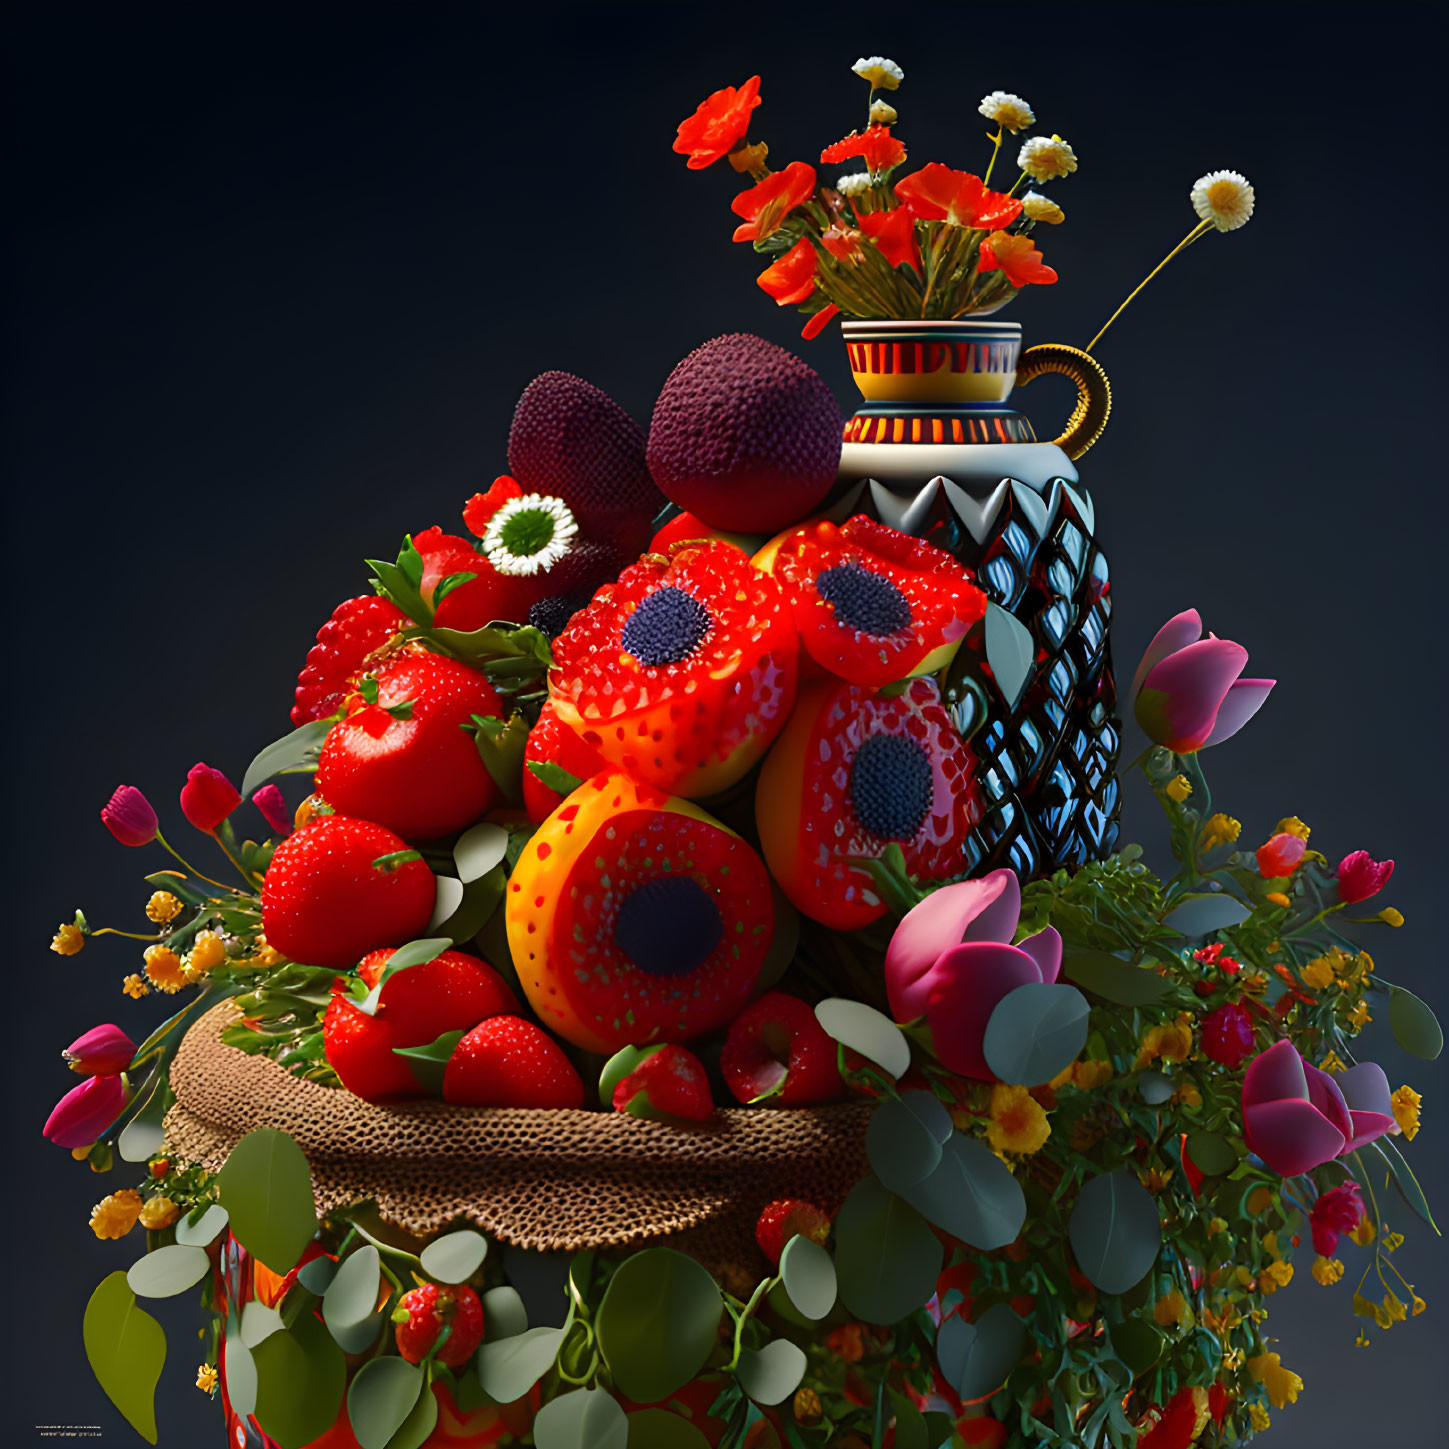 Colorful 3D illustration of flowers and fruits in ornate vase